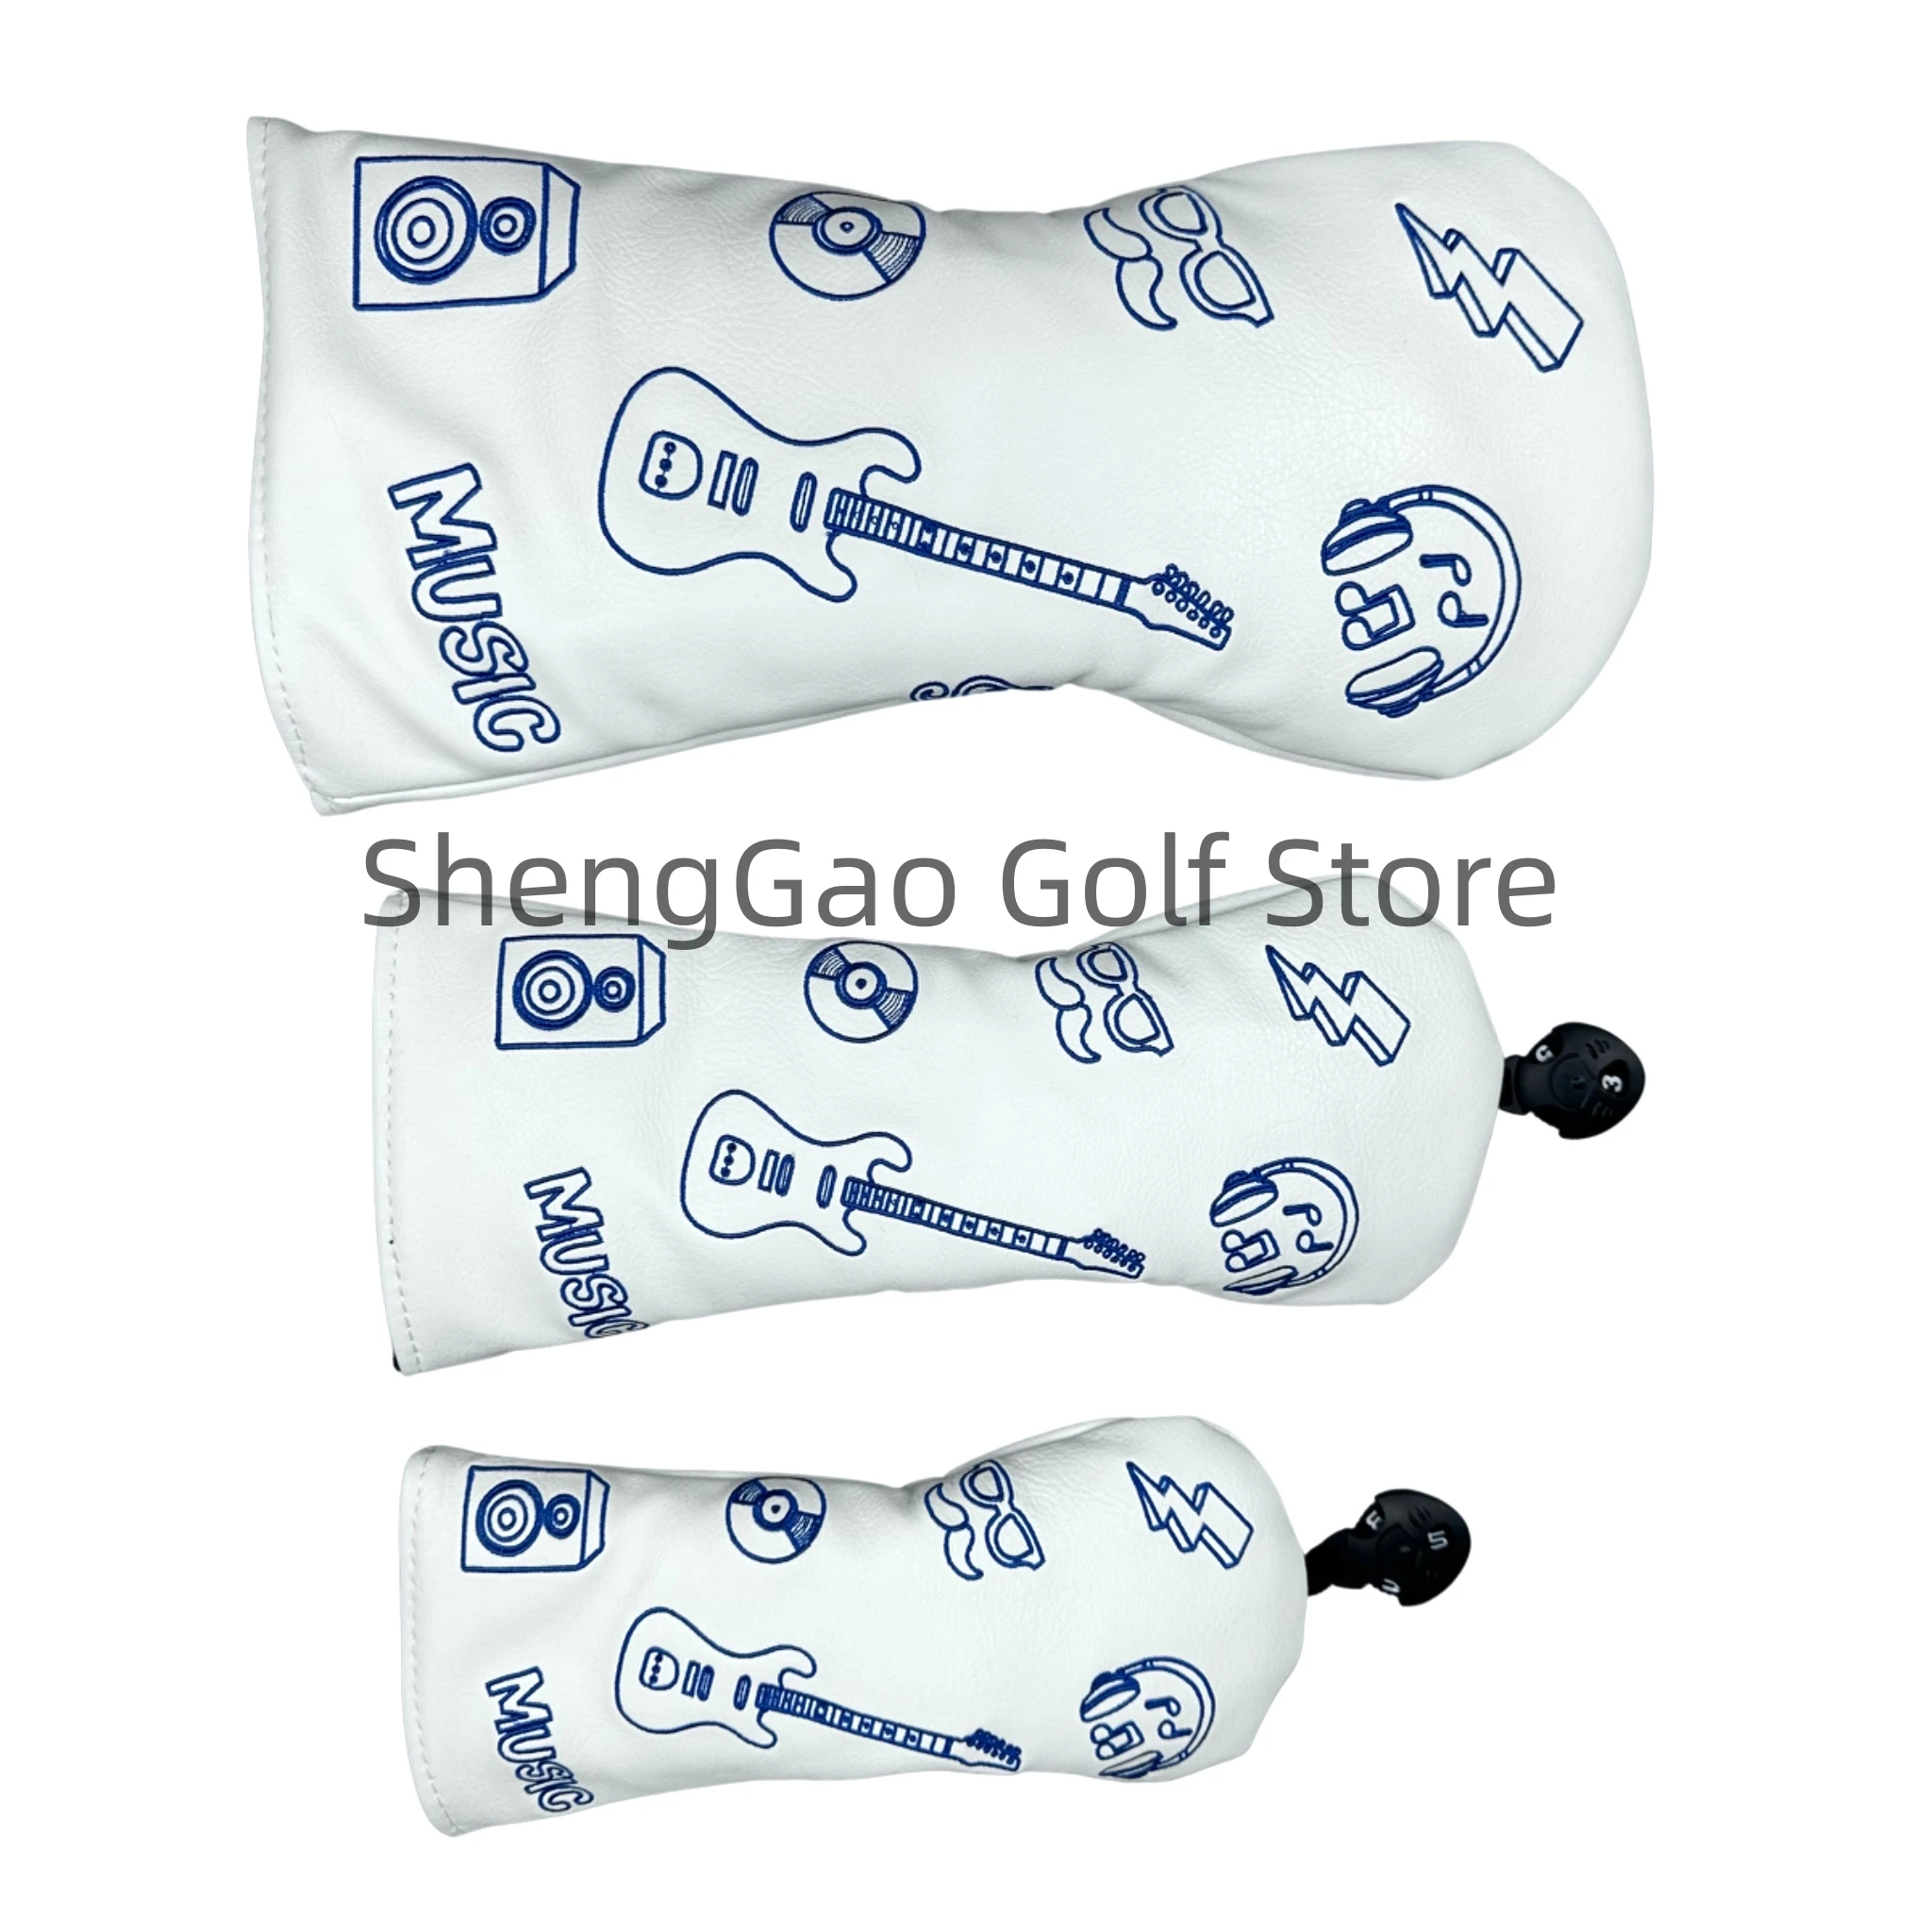 Golf Guitar Musical instrument pattern Head cover Driver Head Covers Fairway Wood Head Covers Hybrid Head Covers Putter Cover